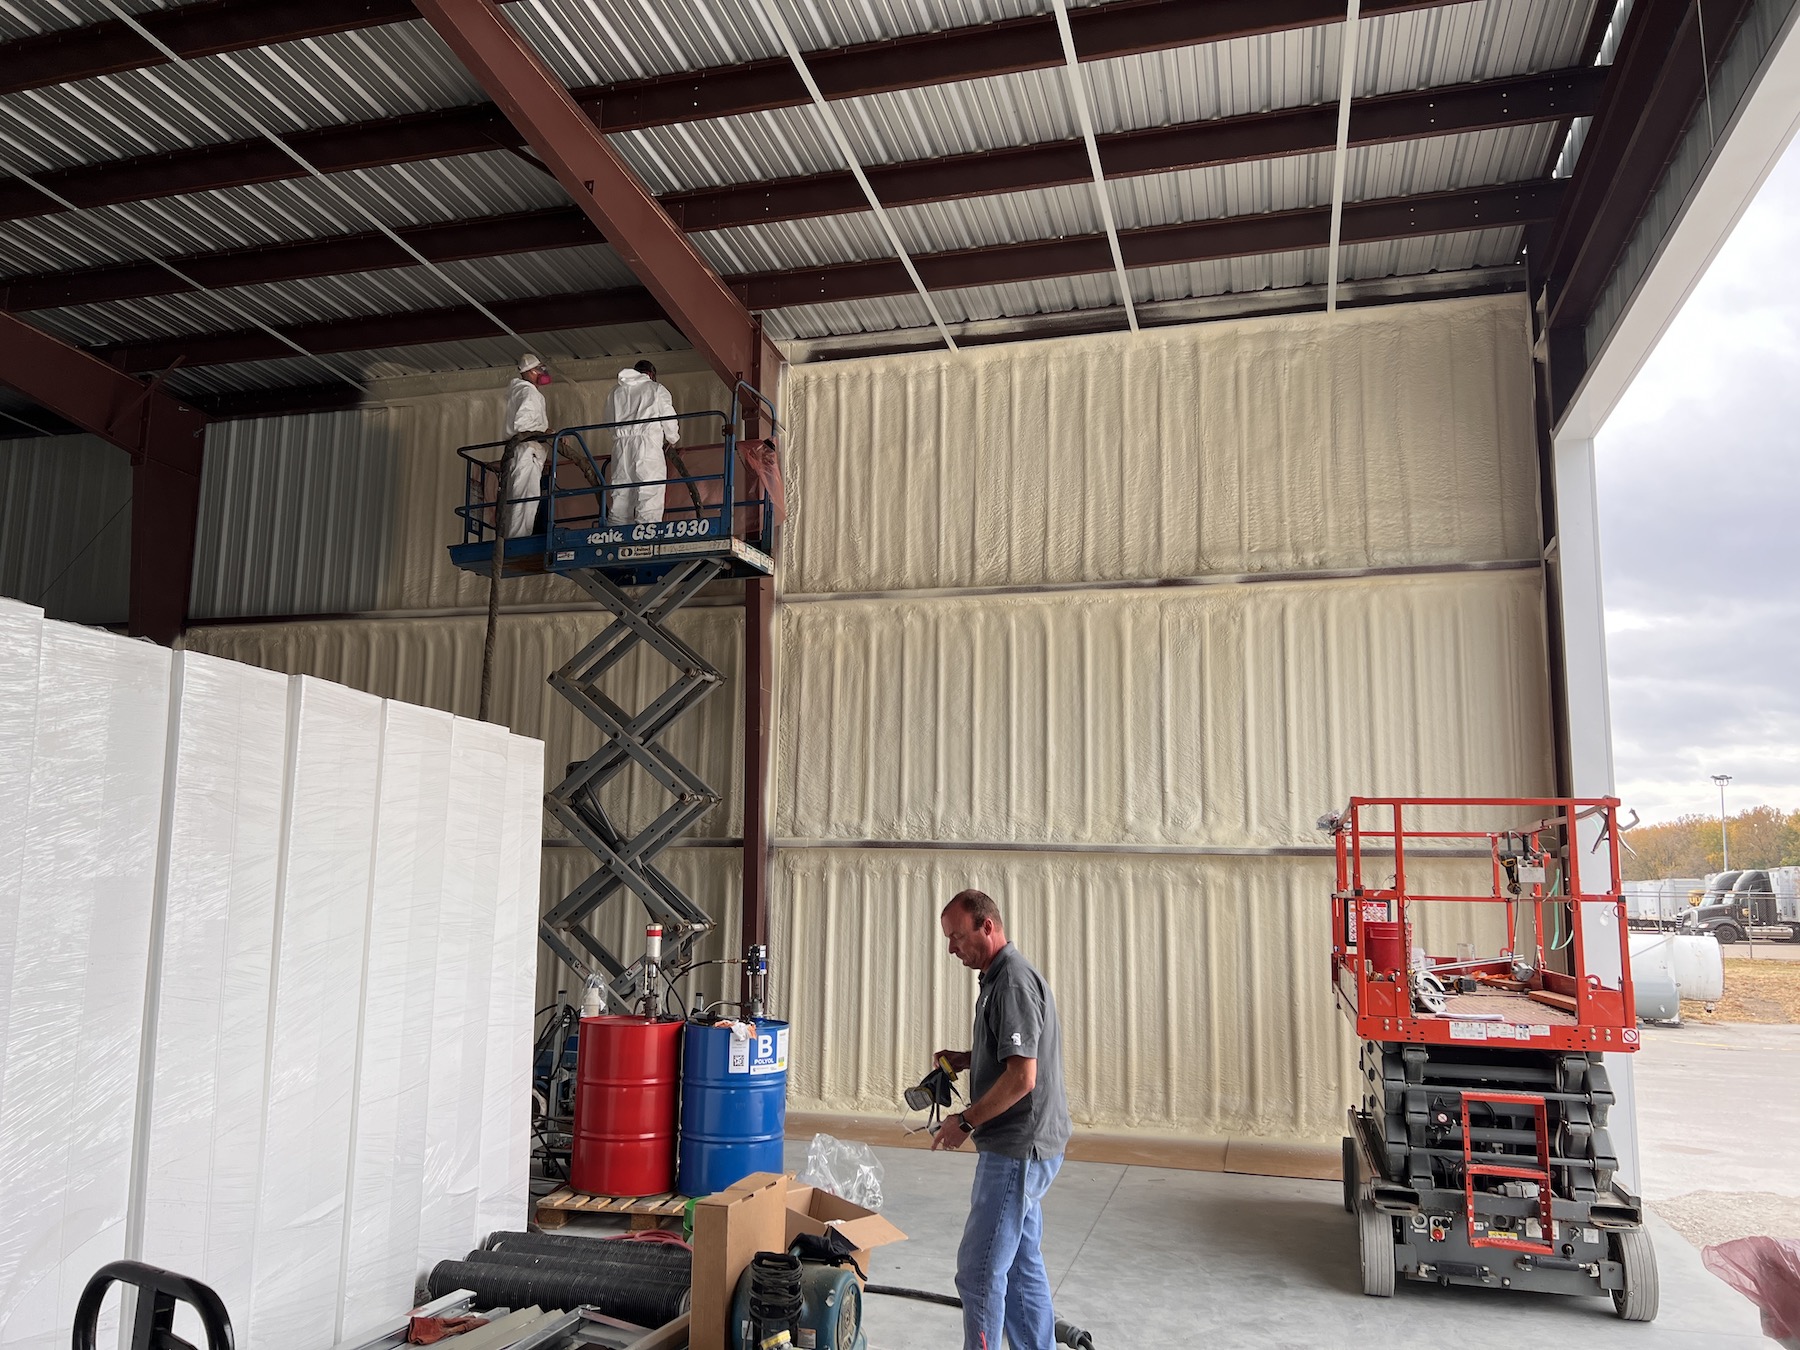 Real-life case study: FSI's polyurethane system application in the construction industry, providing insulation and energy efficiency.